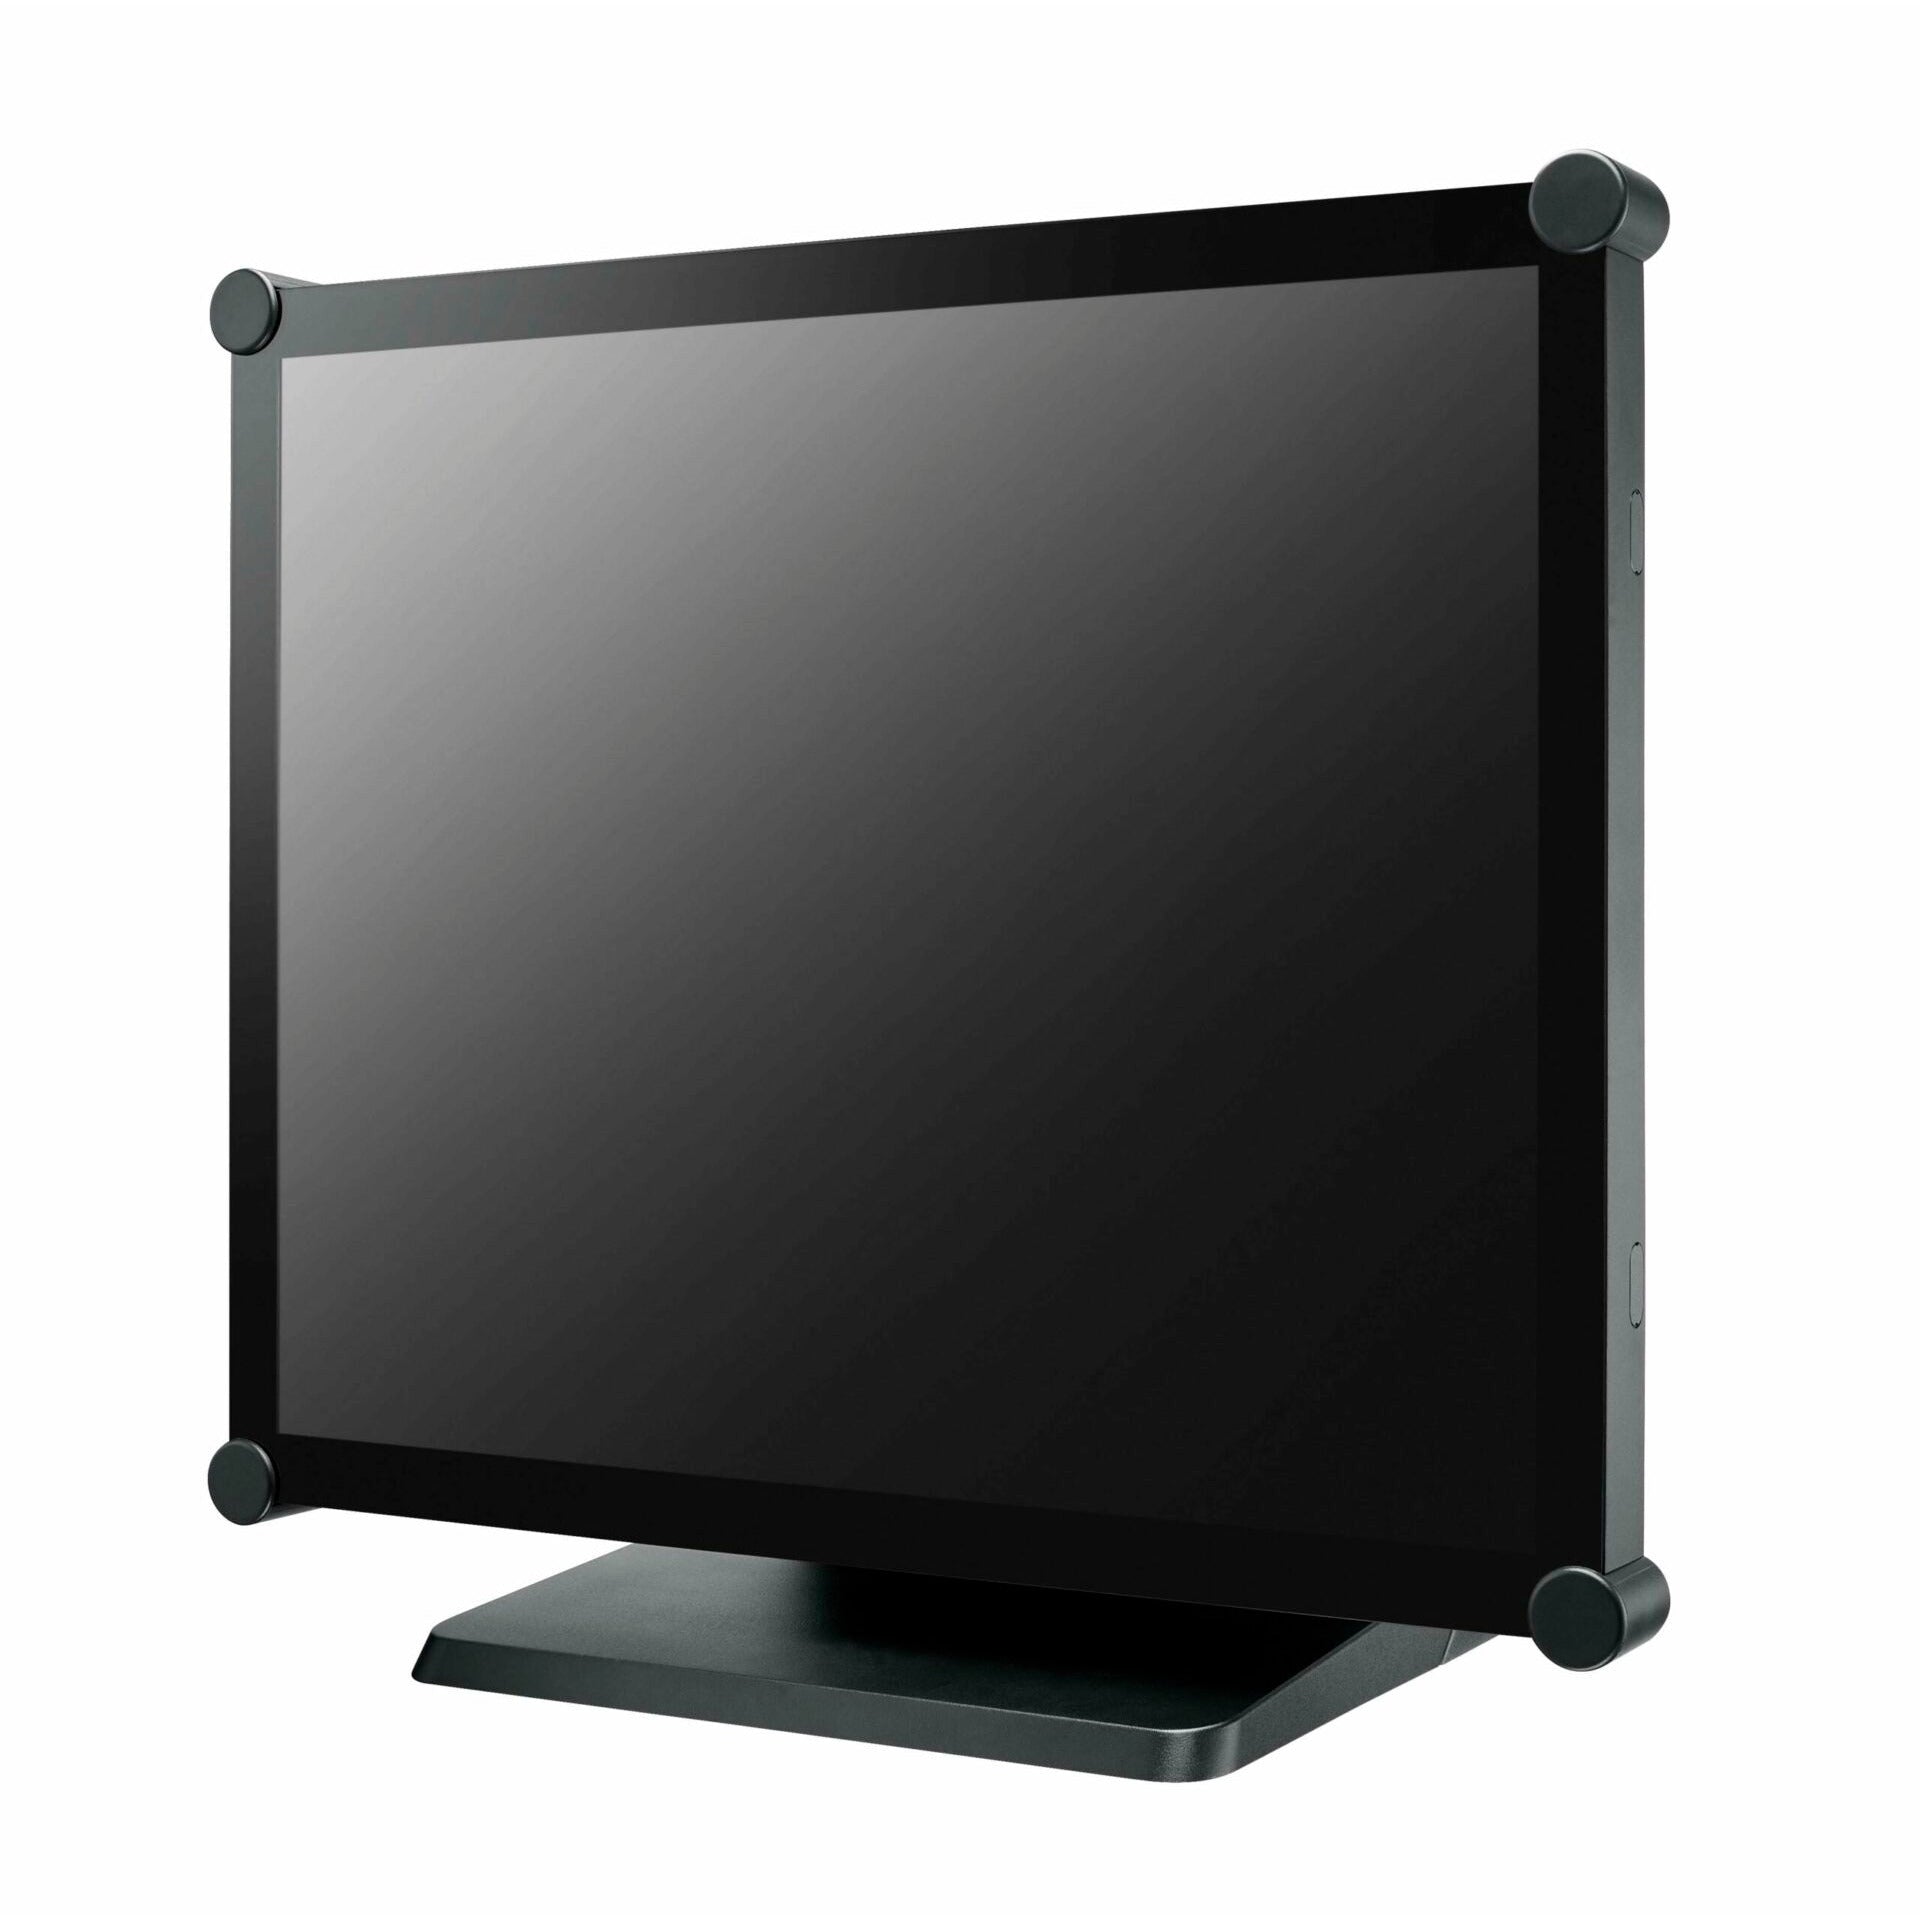 AG Neovo TX-1702 17" Touch Screen Monitor With Metal Casing